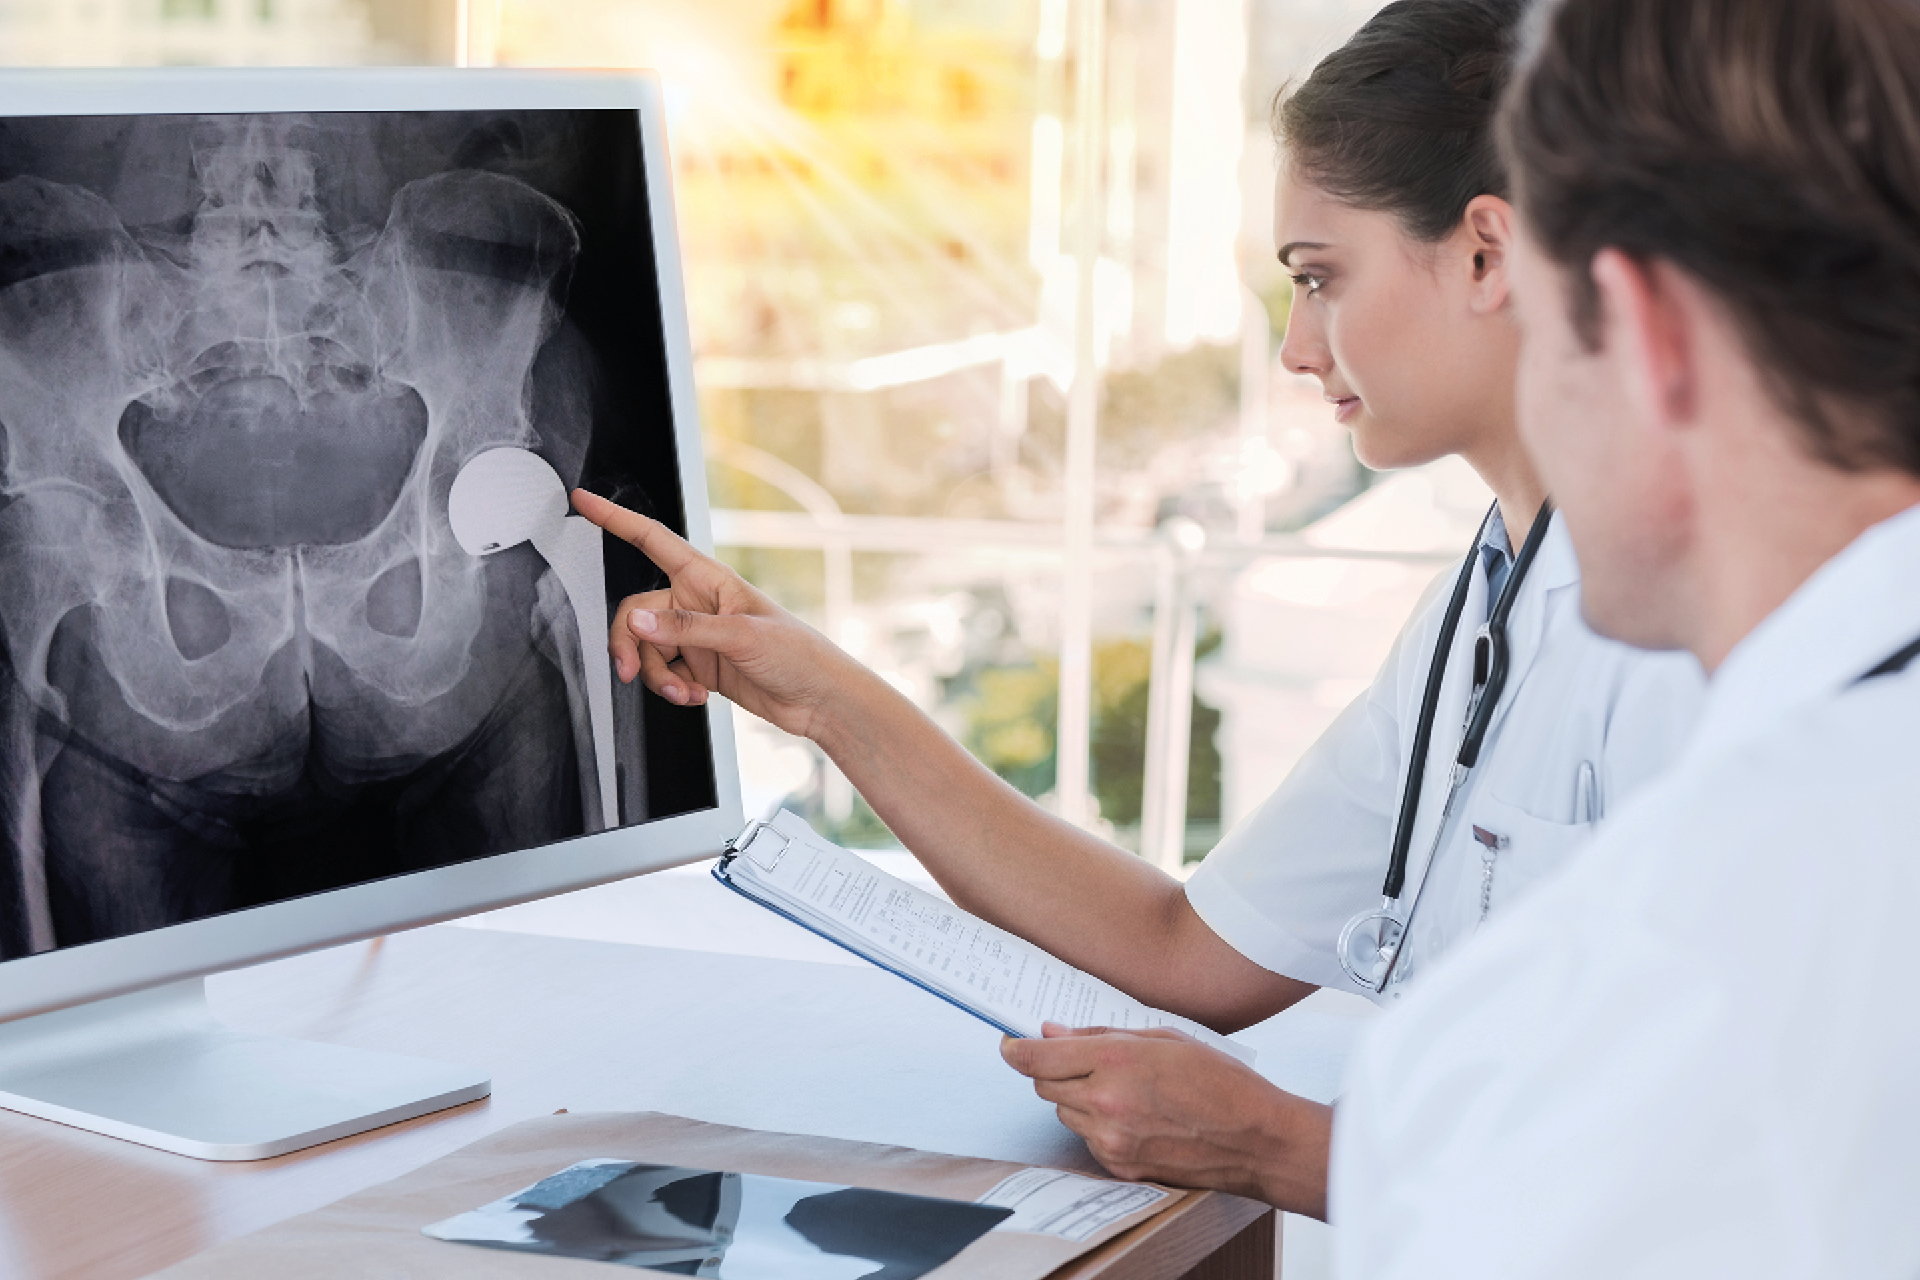 Doctor pointing at the screen of a computer while working with a colleague; Shutterstock ID 142837837; Purchase Order: GF MS; Job: Medical Key visual; Client/Licensee: GF Machining Solutions